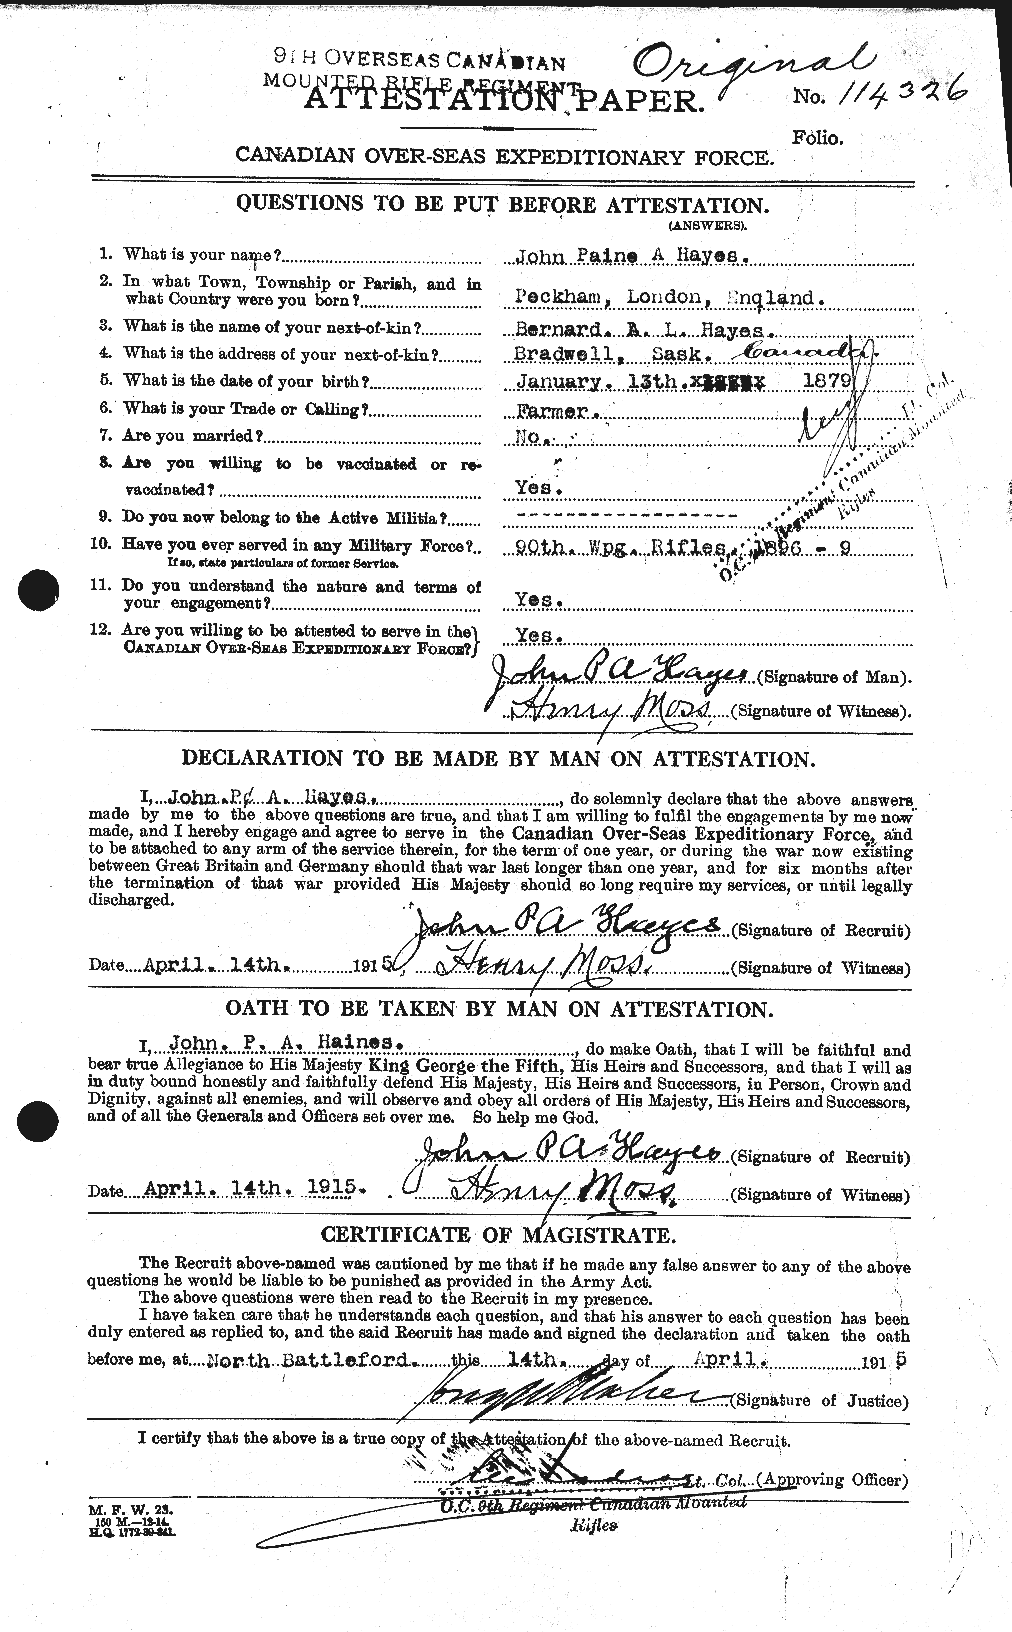 Personnel Records of the First World War - CEF 385585a